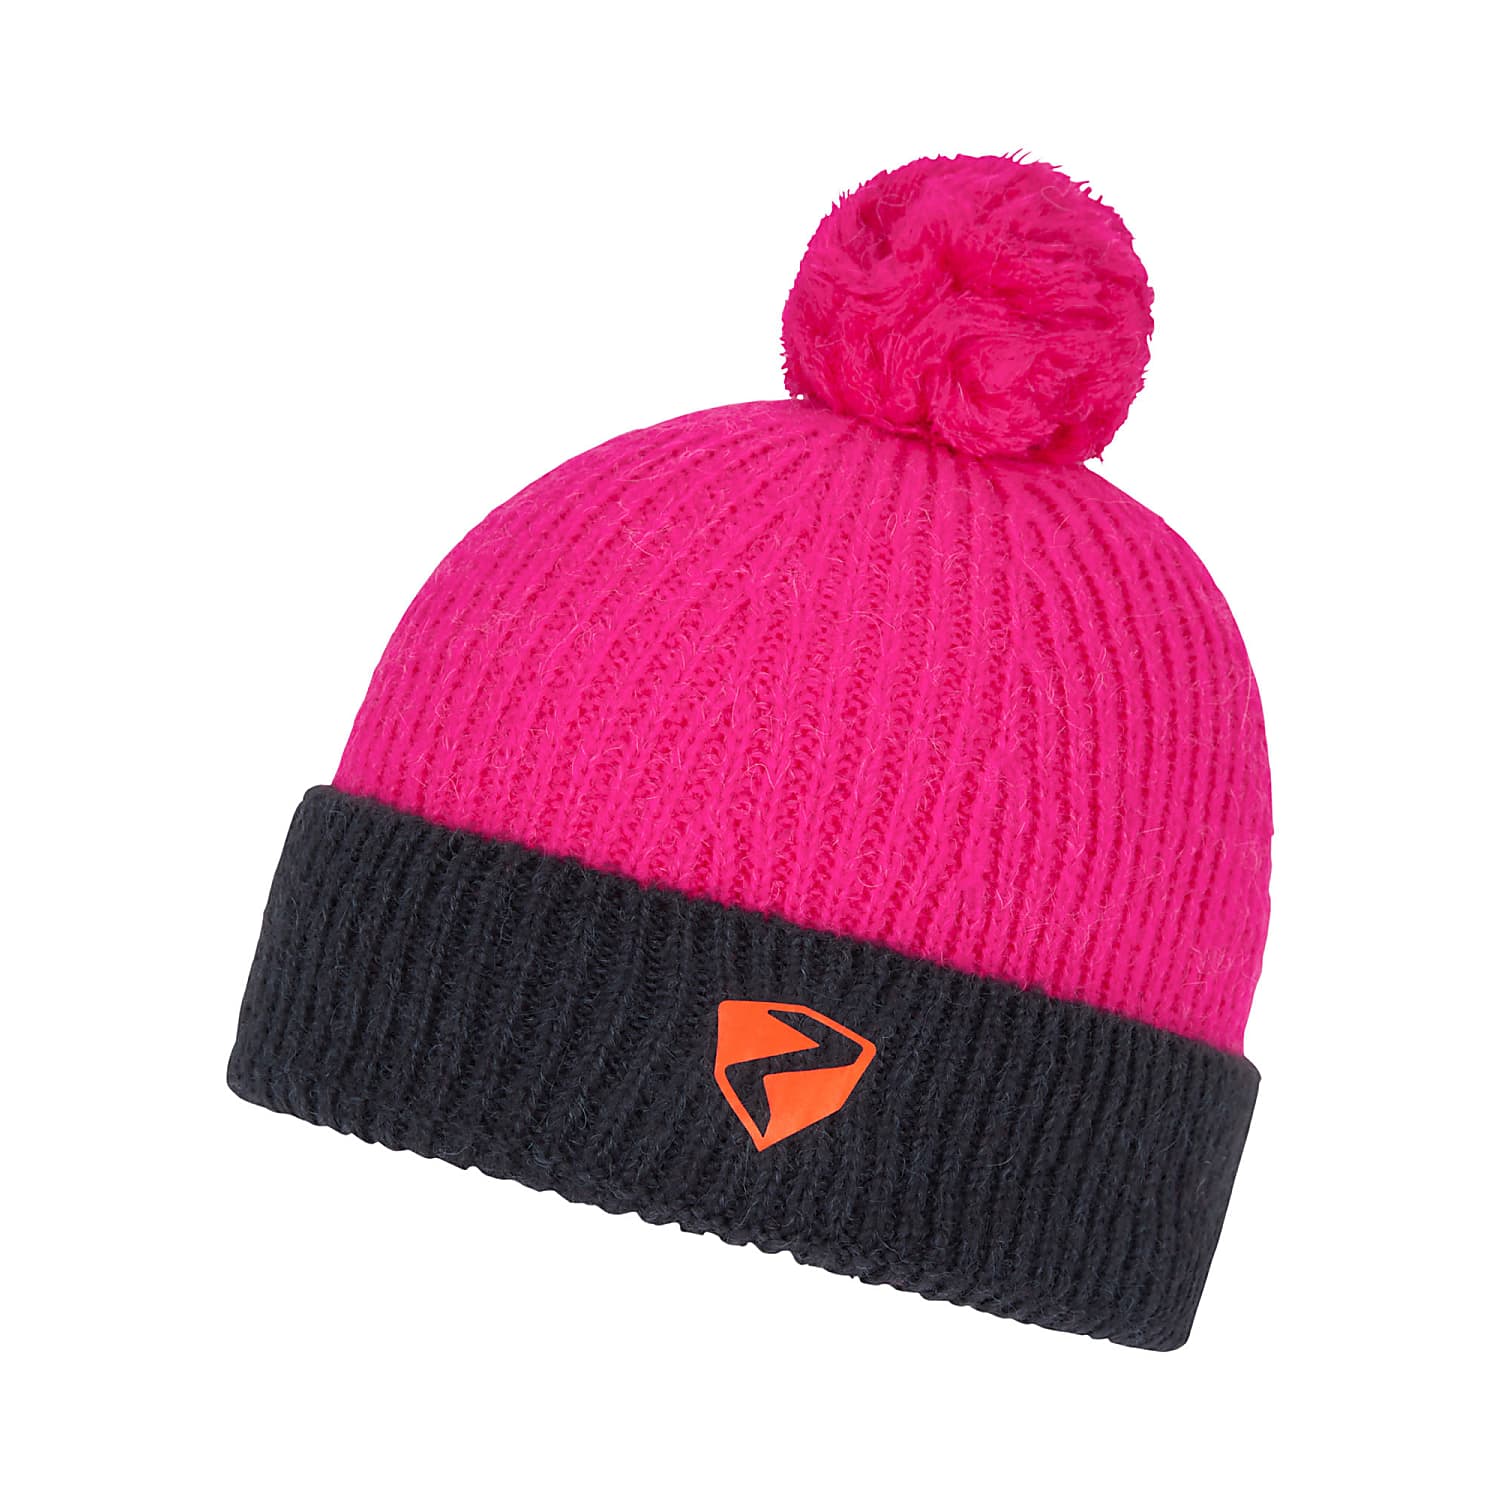 Ziener JUNIOR IKEN HAT (PREVIOUS MODEL), Bright Pink - Fast and cheap  shipping